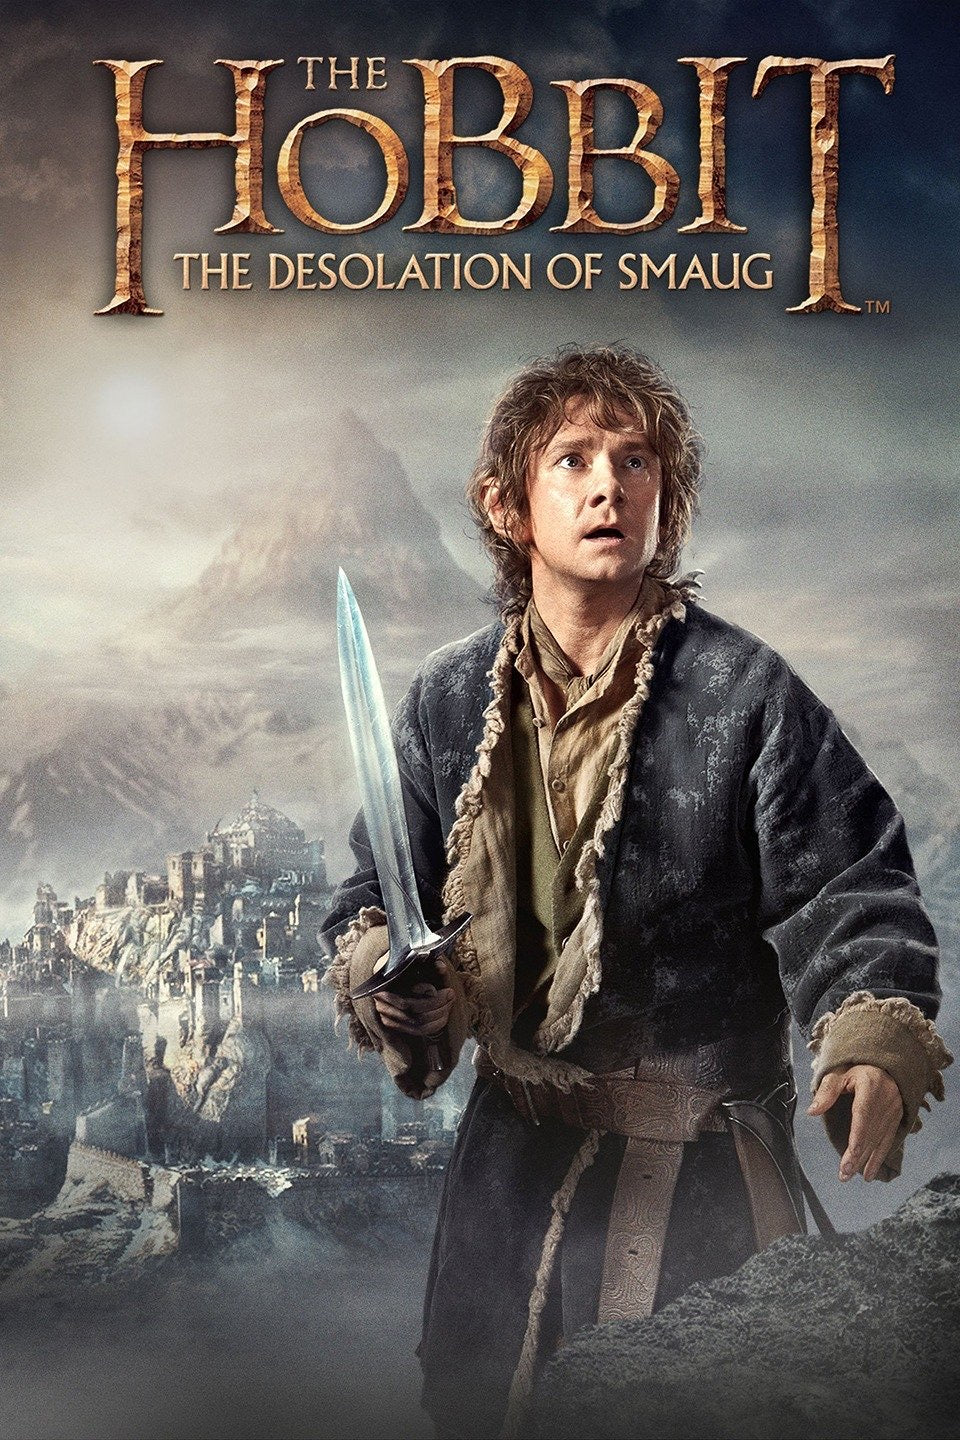 The Hobbit: The Desolation Of Smaug [Theatrical Edition] (2013) Vudu or Movies Anywhere HD code